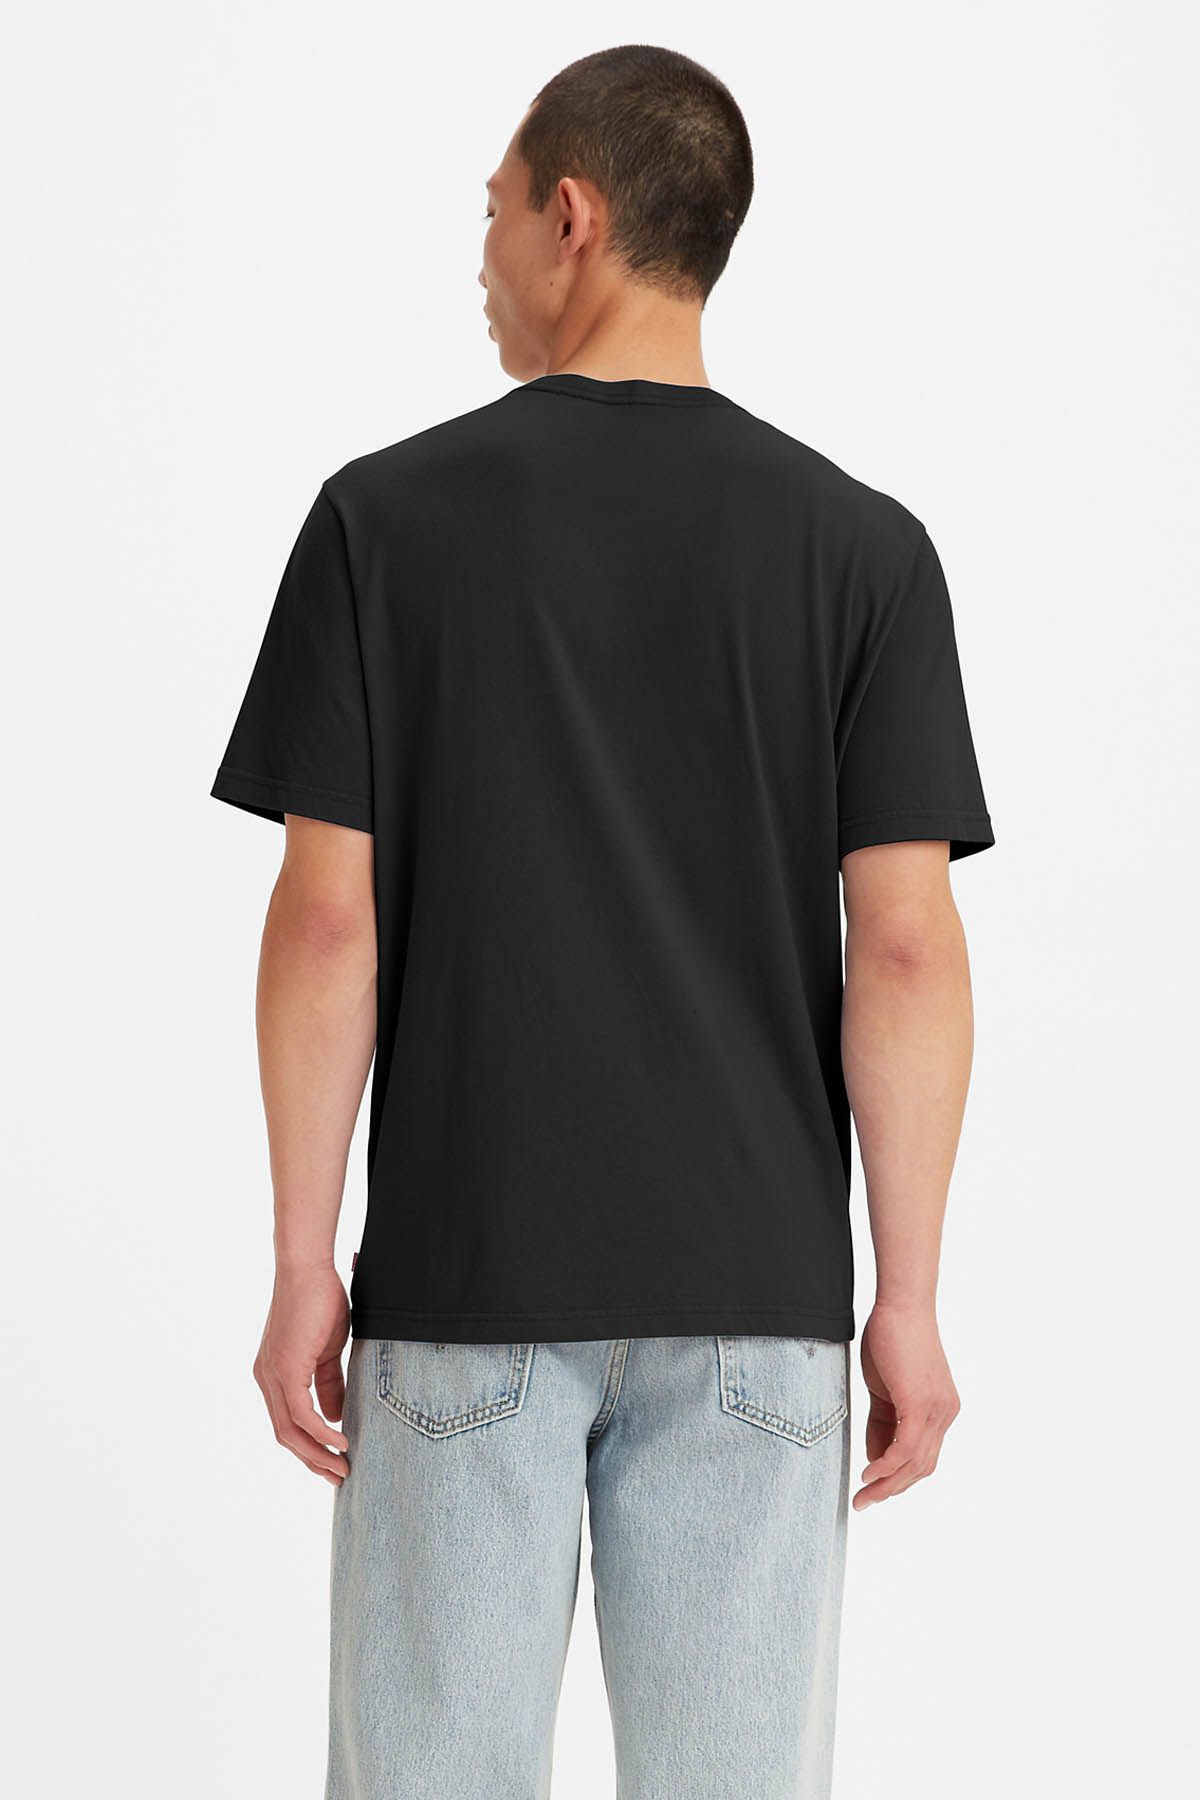 Levi's ® Relaxed Fit Tee Seassonal Palm Caviar Black Men T-Shirts